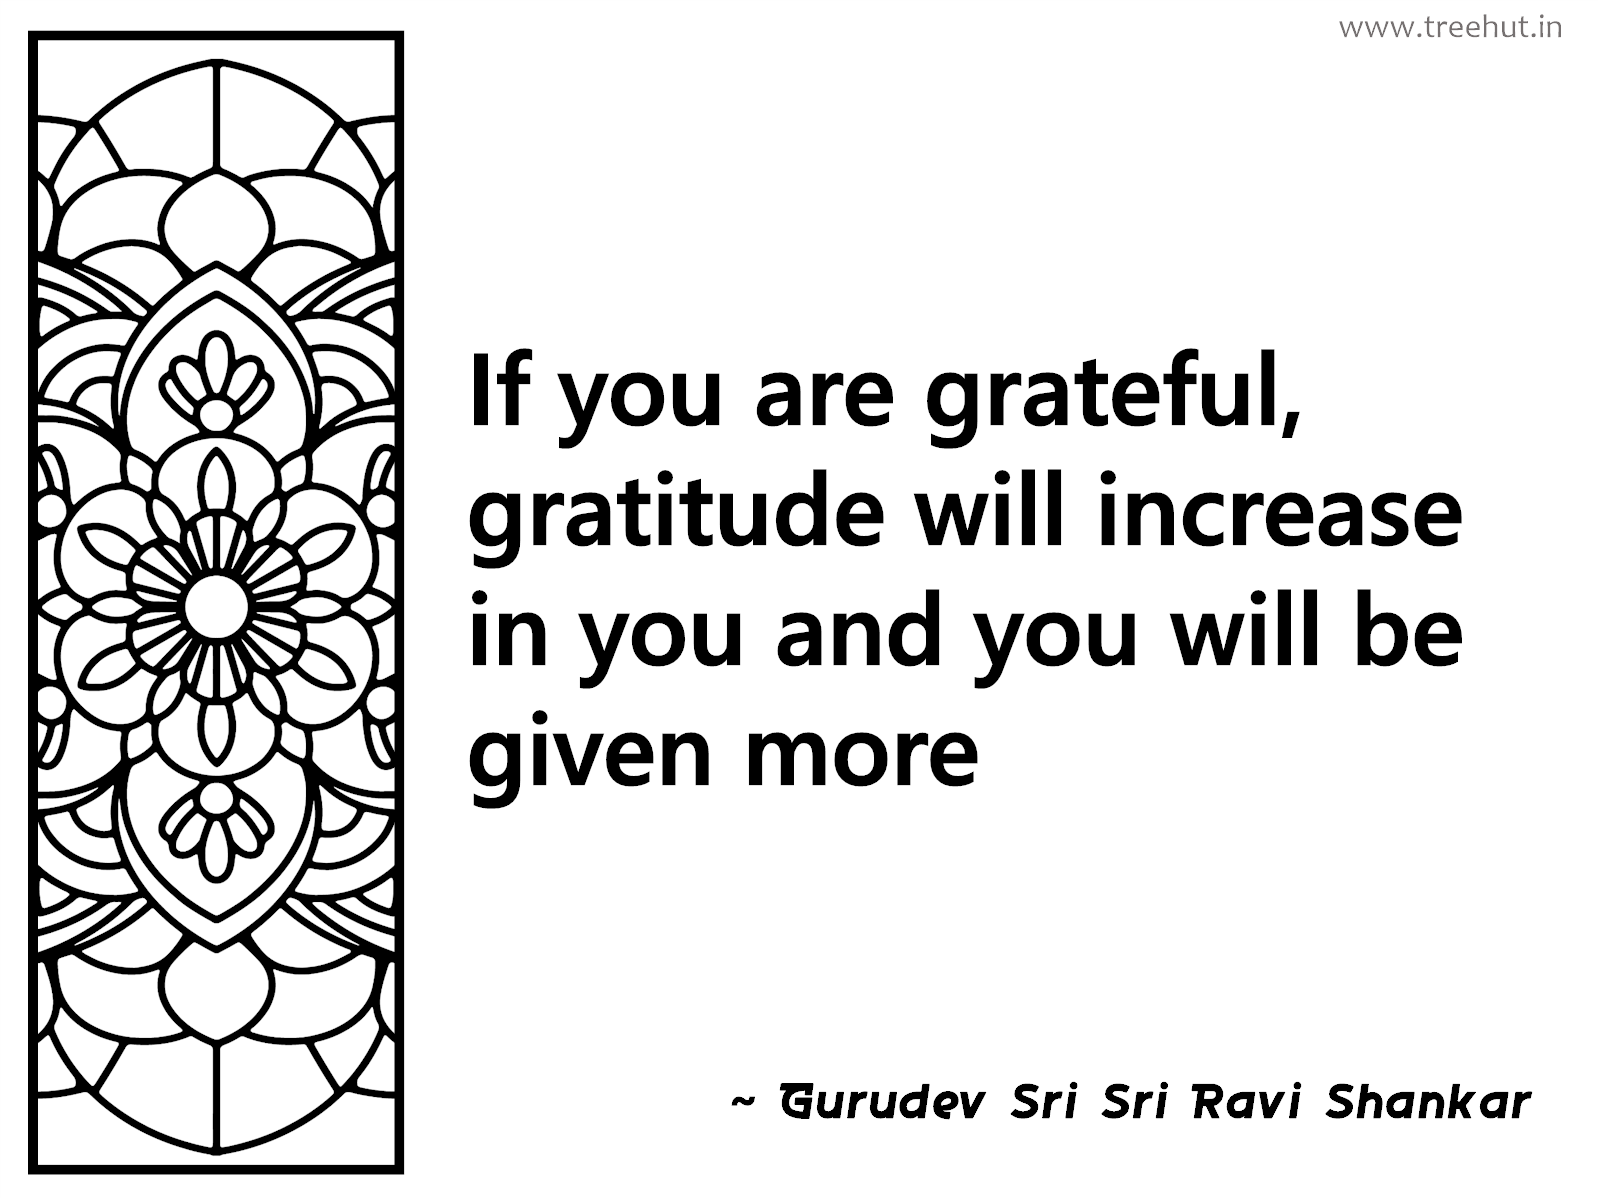 If you are grateful, gratitude will increase in you and you will be given more Inspirational Quote by Gurudev Sri Sri Ravi Shankar, coloring pages